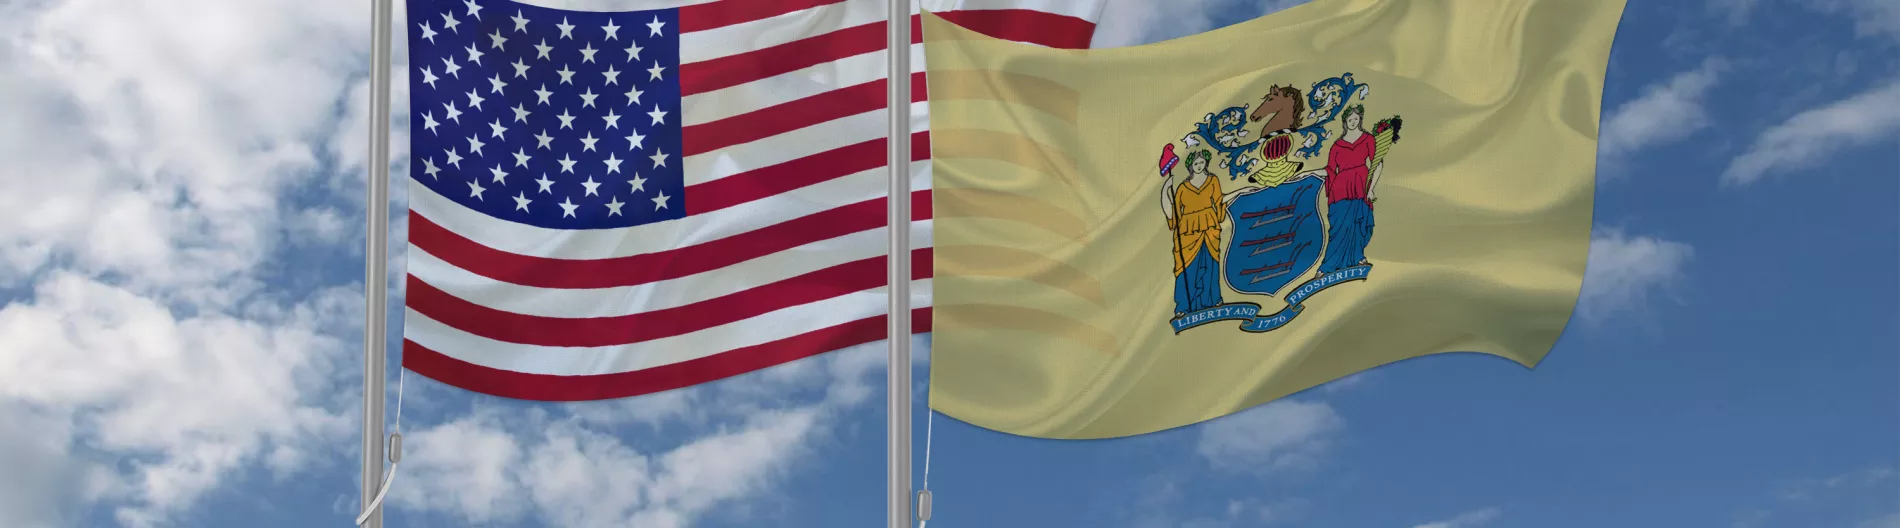 United States and New Jersey flags